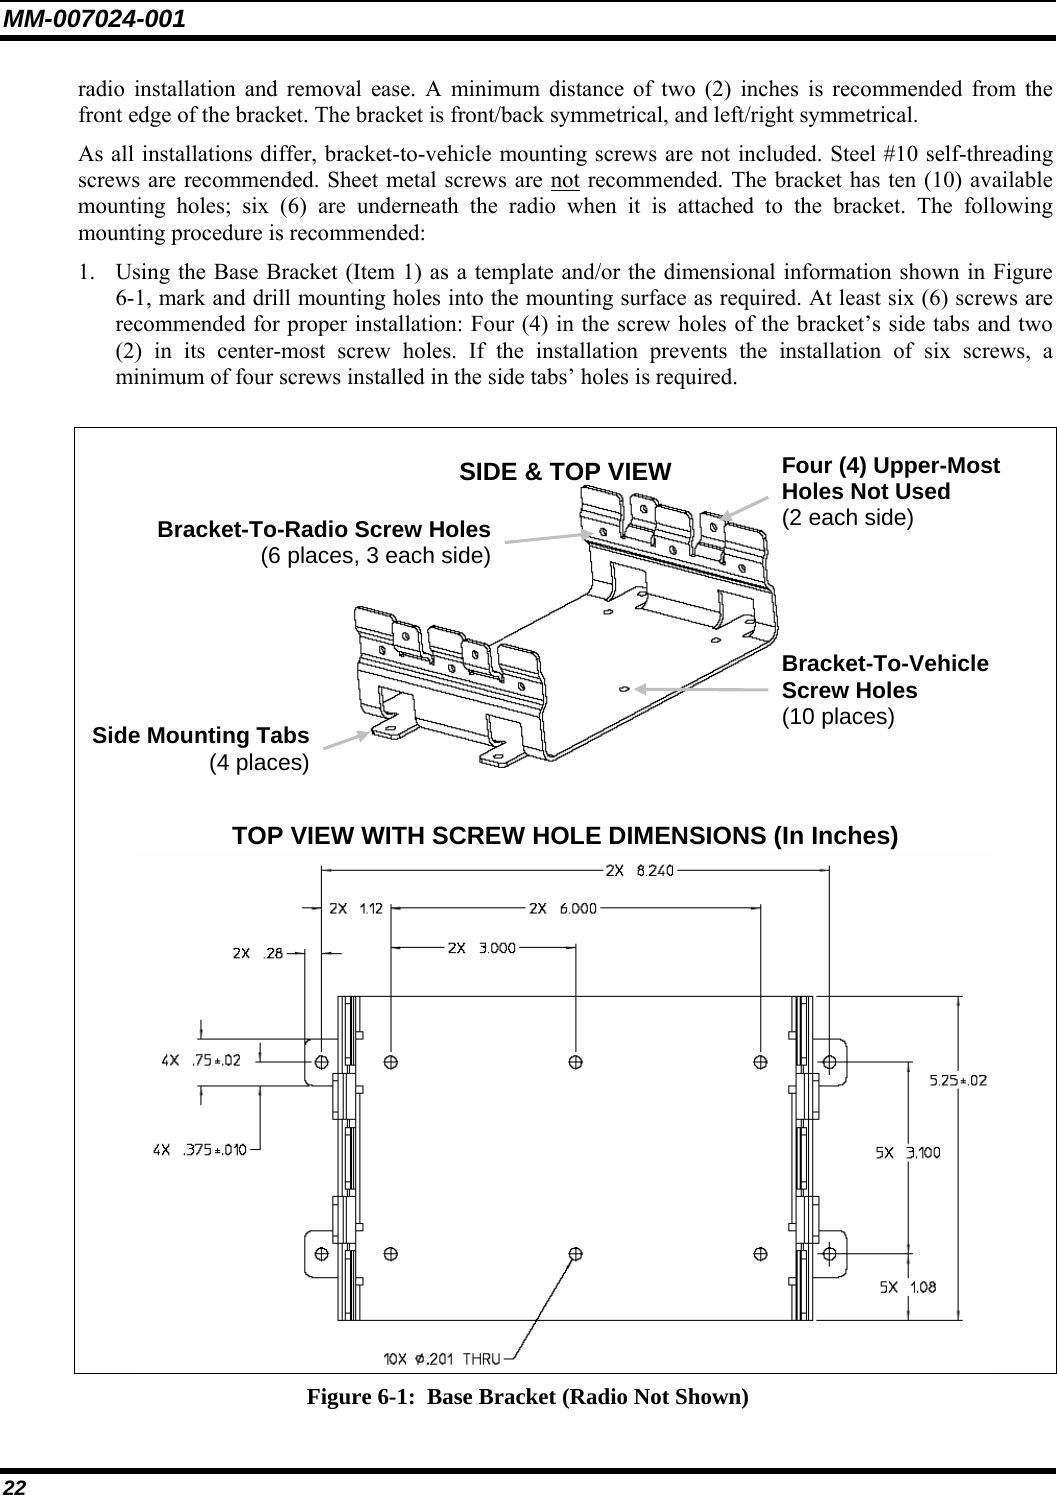 MM-007024-001 22 radio installation and removal ease. A minimum distance of two (2) inches is recommended from the front edge of the bracket. The bracket is front/back symmetrical, and left/right symmetrical. As all installations differ, bracket-to-vehicle mounting screws are not included. Steel #10 self-threading screws are recommended. Sheet metal screws are not recommended. The bracket has ten (10) available mounting holes; six (6) are underneath the radio when it is attached to the bracket. The following mounting procedure is recommended: 1. Using the Base Bracket (Item 1) as a template and/or the dimensional information shown in Figure 6-1, mark and drill mounting holes into the mounting surface as required. At least six (6) screws are recommended for proper installation: Four (4) in the screw holes of the bracket’s side tabs and two (2) in its center-most screw holes. If the installation prevents the installation of six screws, a minimum of four screws installed in the side tabs’ holes is required.  SIDE &amp; TOP VIEW    TOP VIEW WITH SCREW HOLE DIMENSIONS (In Inches)  Figure 6-1:  Base Bracket (Radio Not Shown) Side Mounting Tabs(4 places)Bracket-To-Vehicle Screw Holes (10 places) Bracket-To-Radio Screw Holes(6 places, 3 each side)Four (4) Upper-Most Holes Not Used (2 each side) 